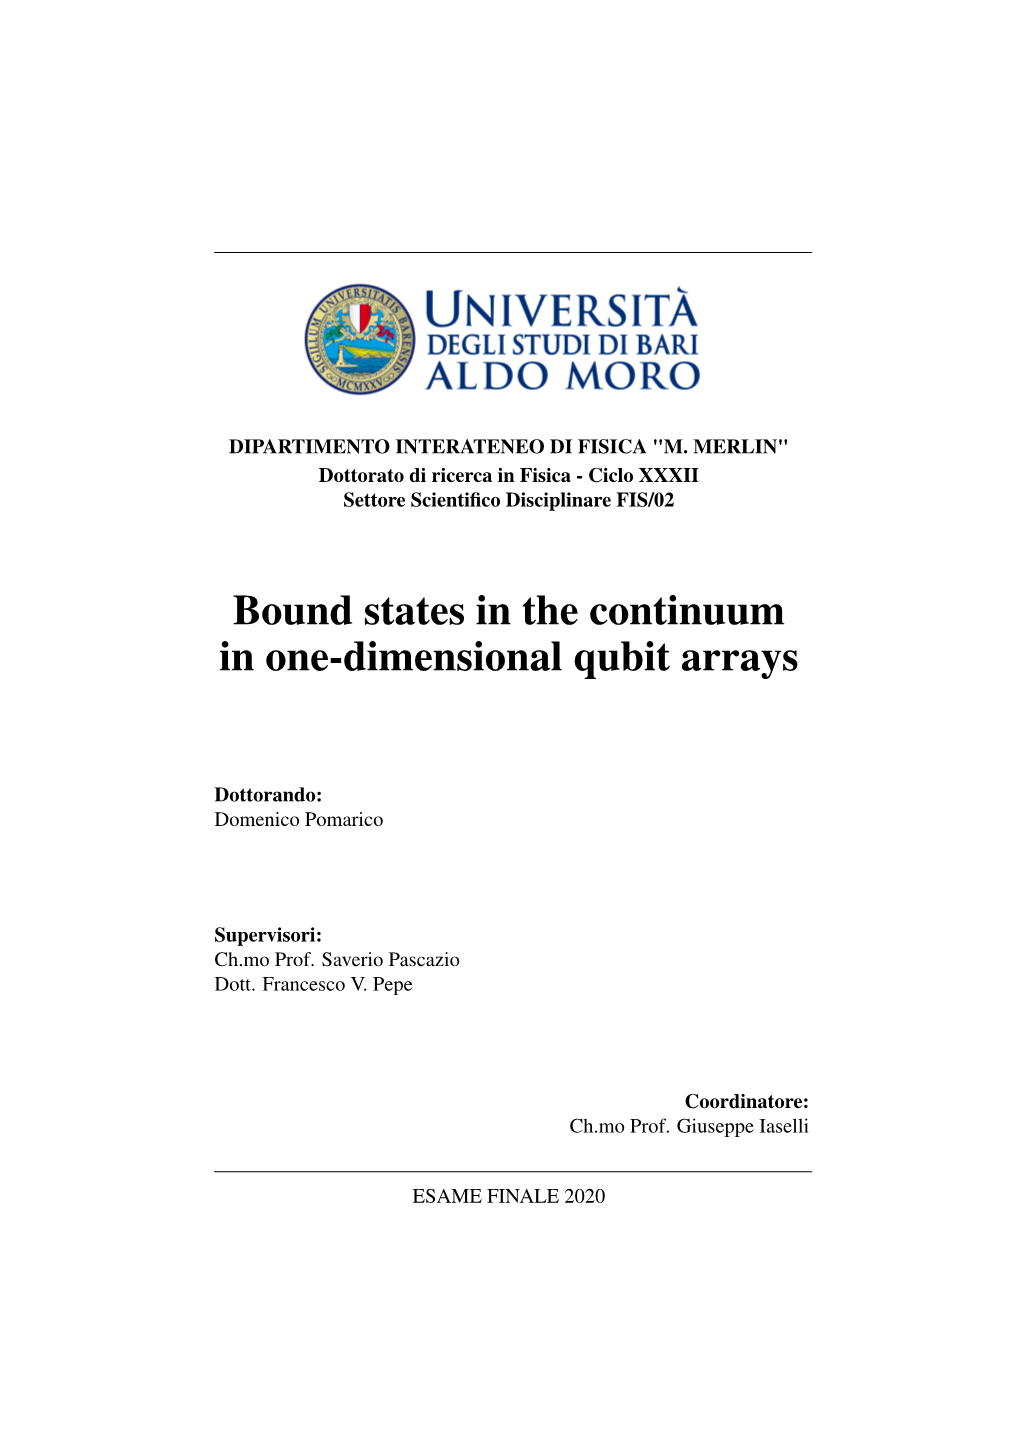 Bound States in the Continuum in One-Dimensional Qubit Arrays